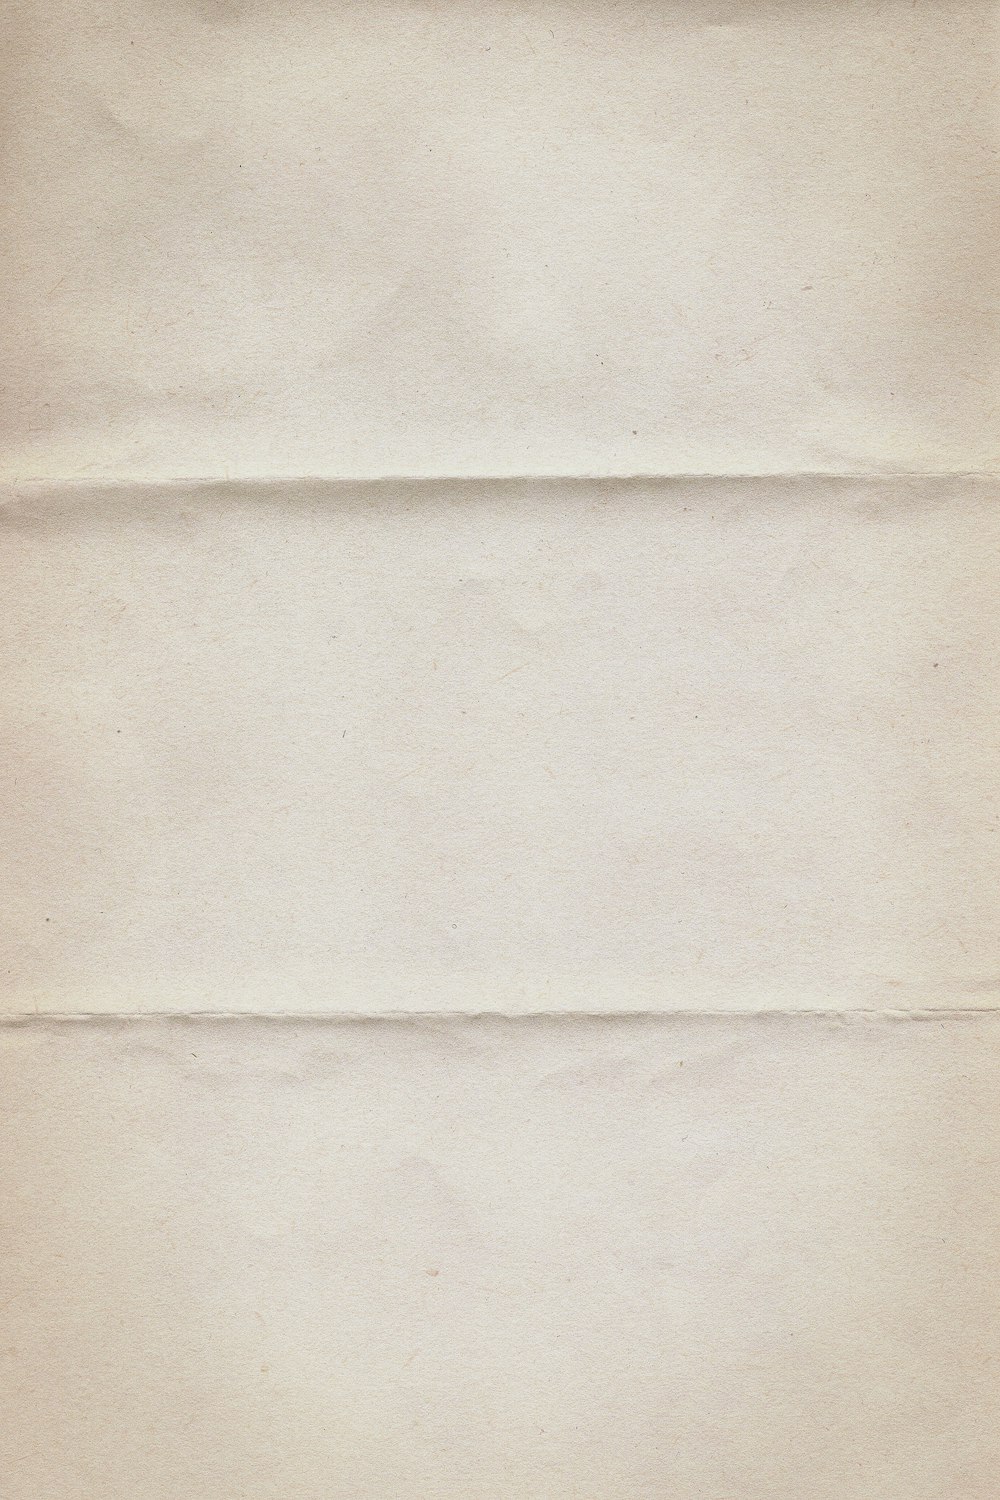 a piece of white paper with a brown border